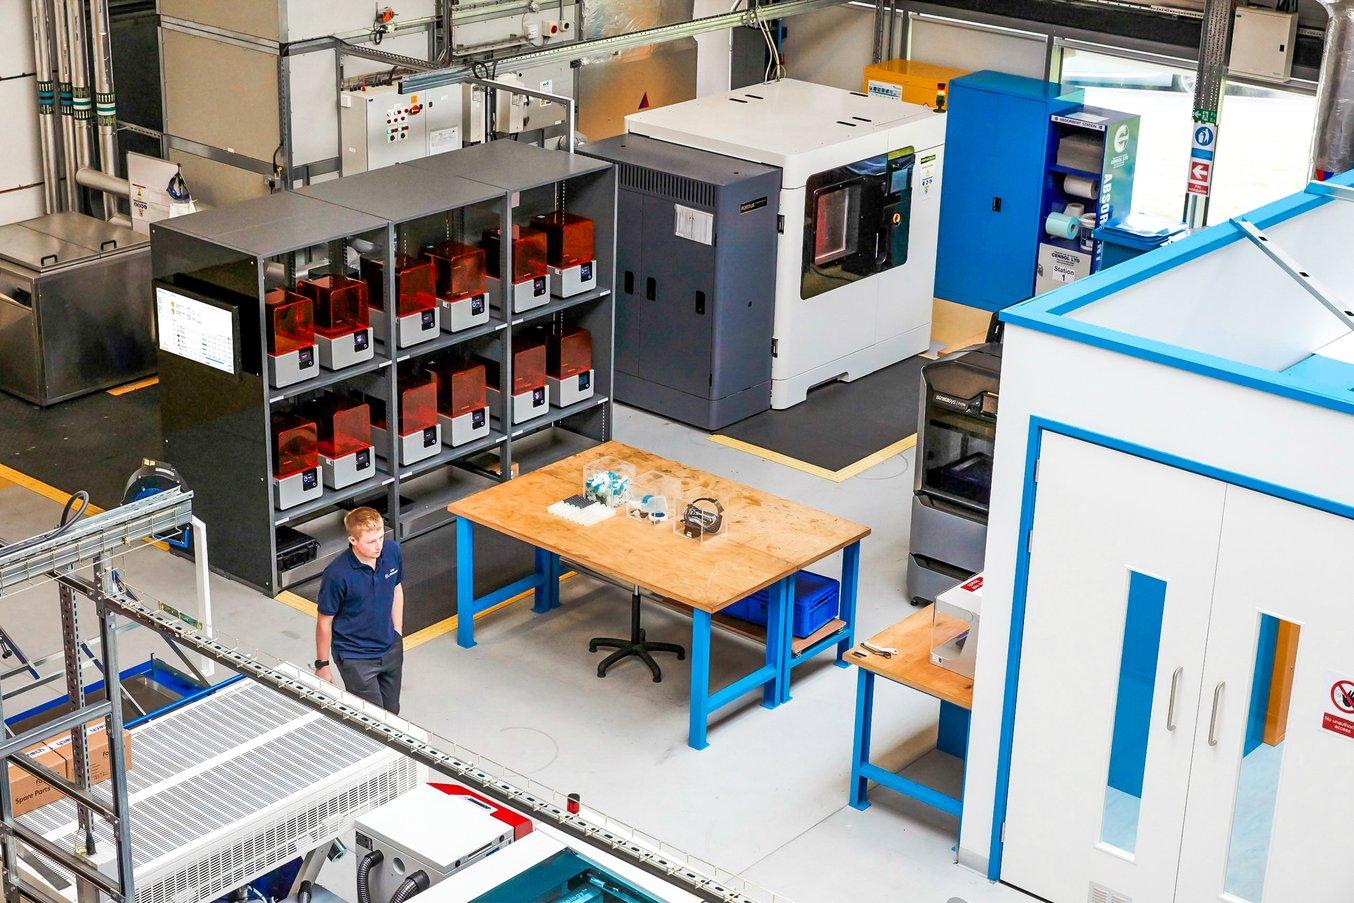 The University of Sheffield Advanced Manufacturing Research Centre (AMRC) uses a fleet of 12 SLA 3D printers for most engineering and manufacturing applications and reserve five industrial FDM printers for larger parts.